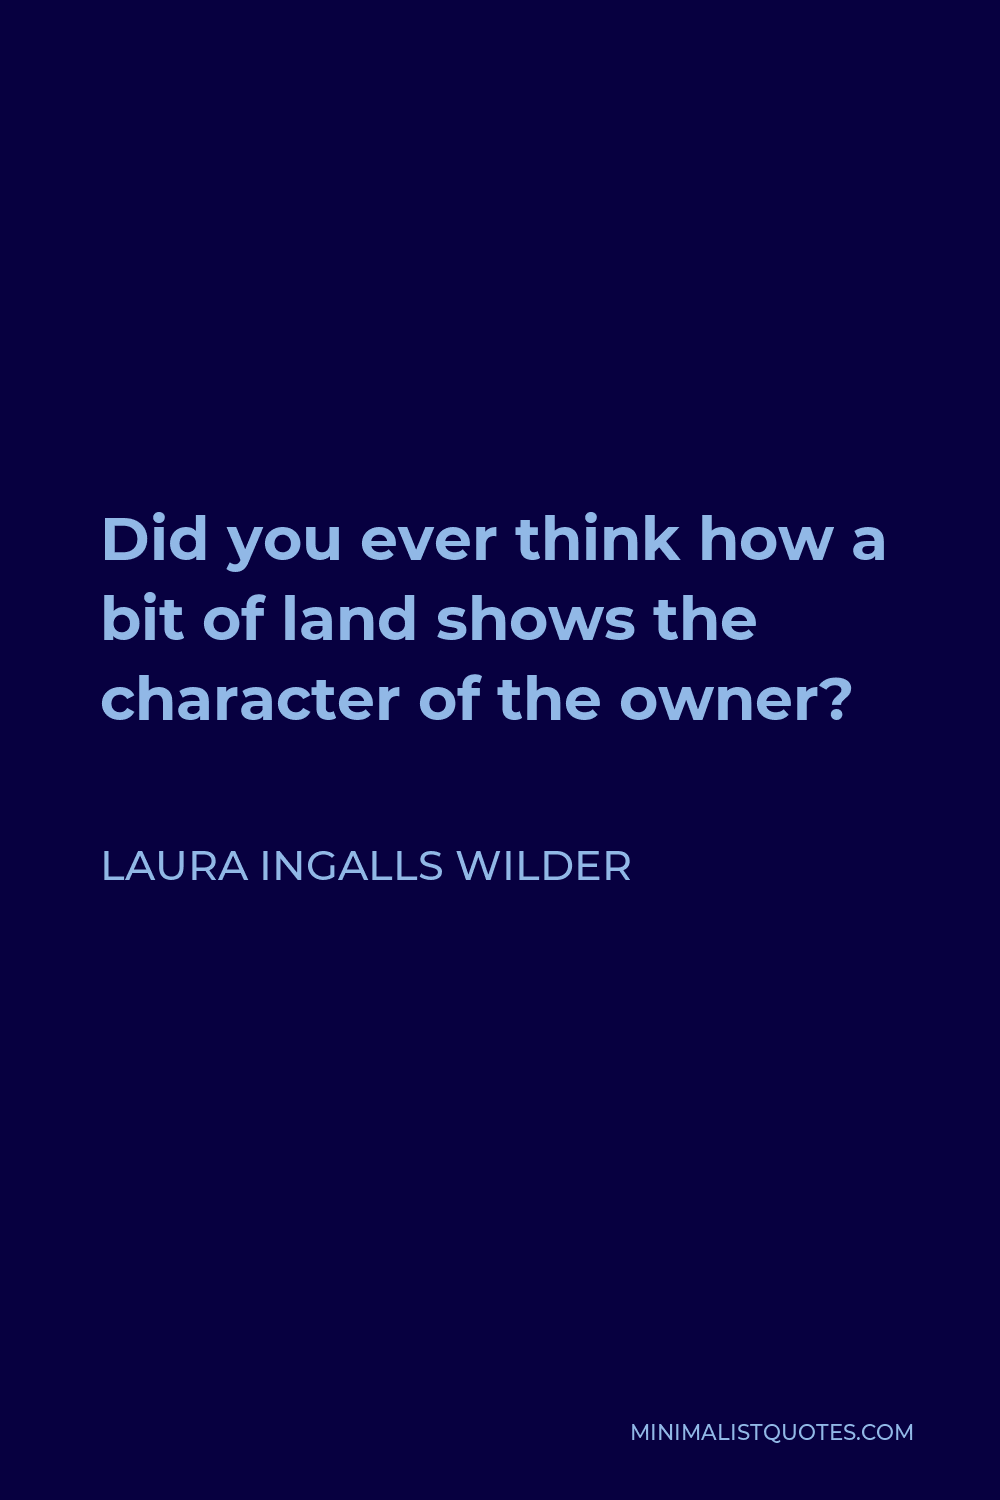 Laura Ingalls Wilder Quote - Did you ever think how a bit of land shows the character of the owner?